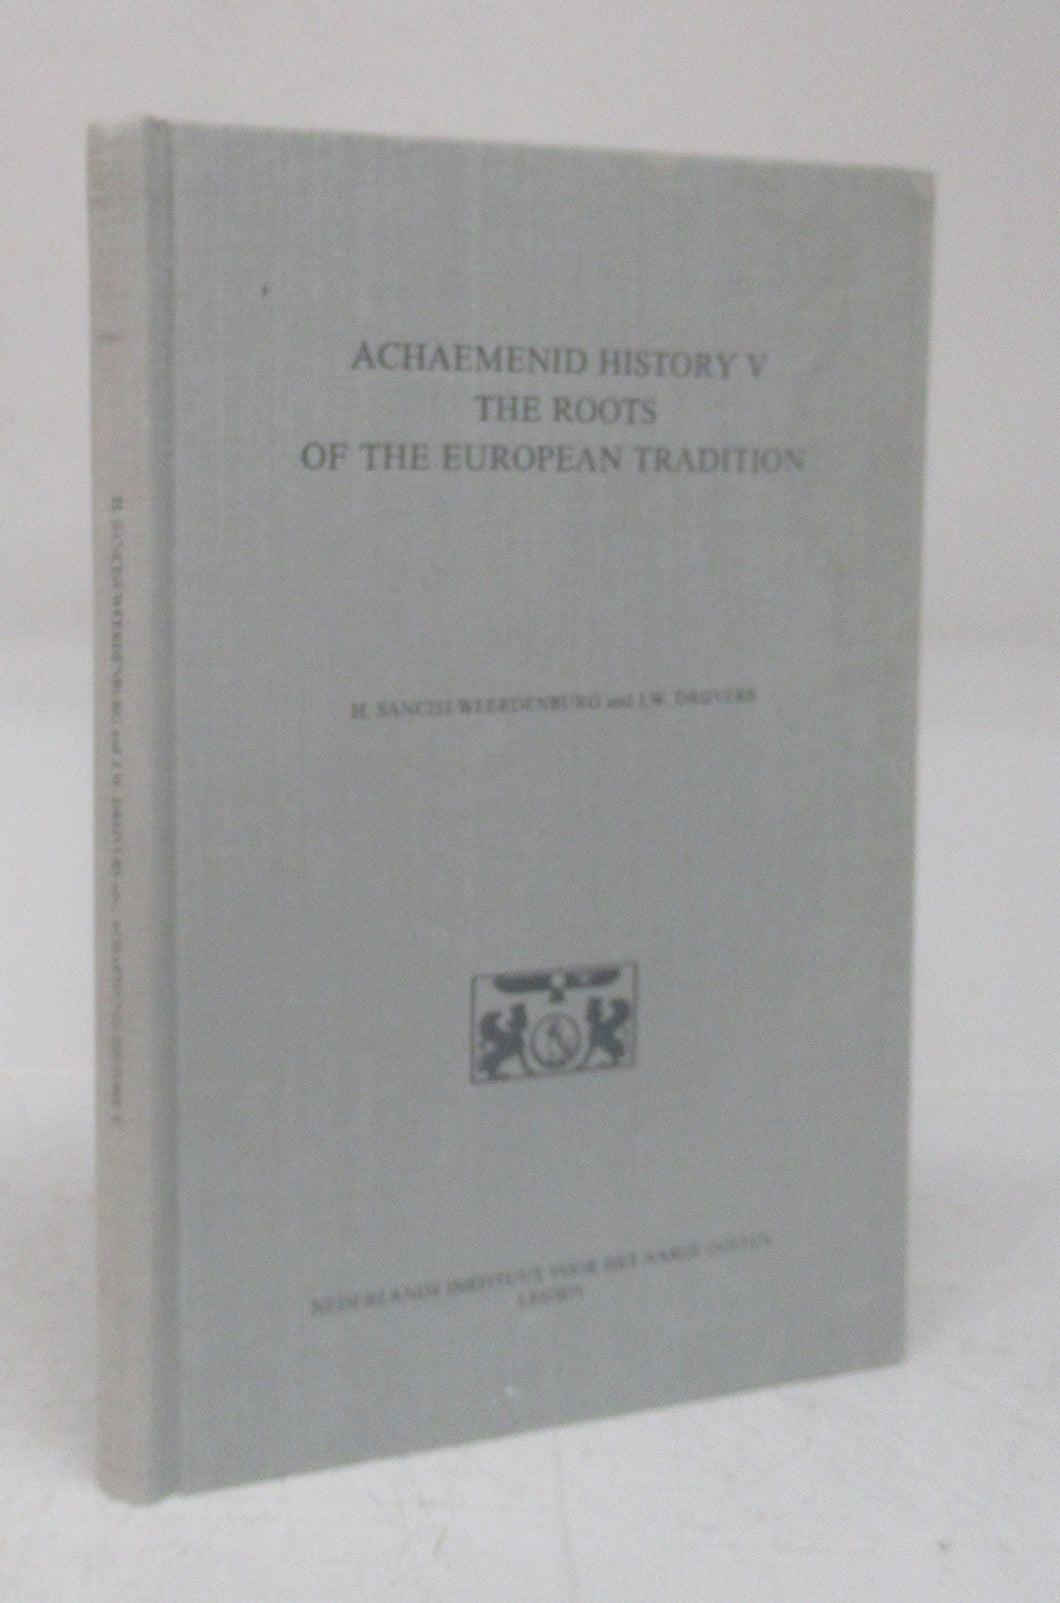 Achaemenid History V: The Roots of the European Tradition